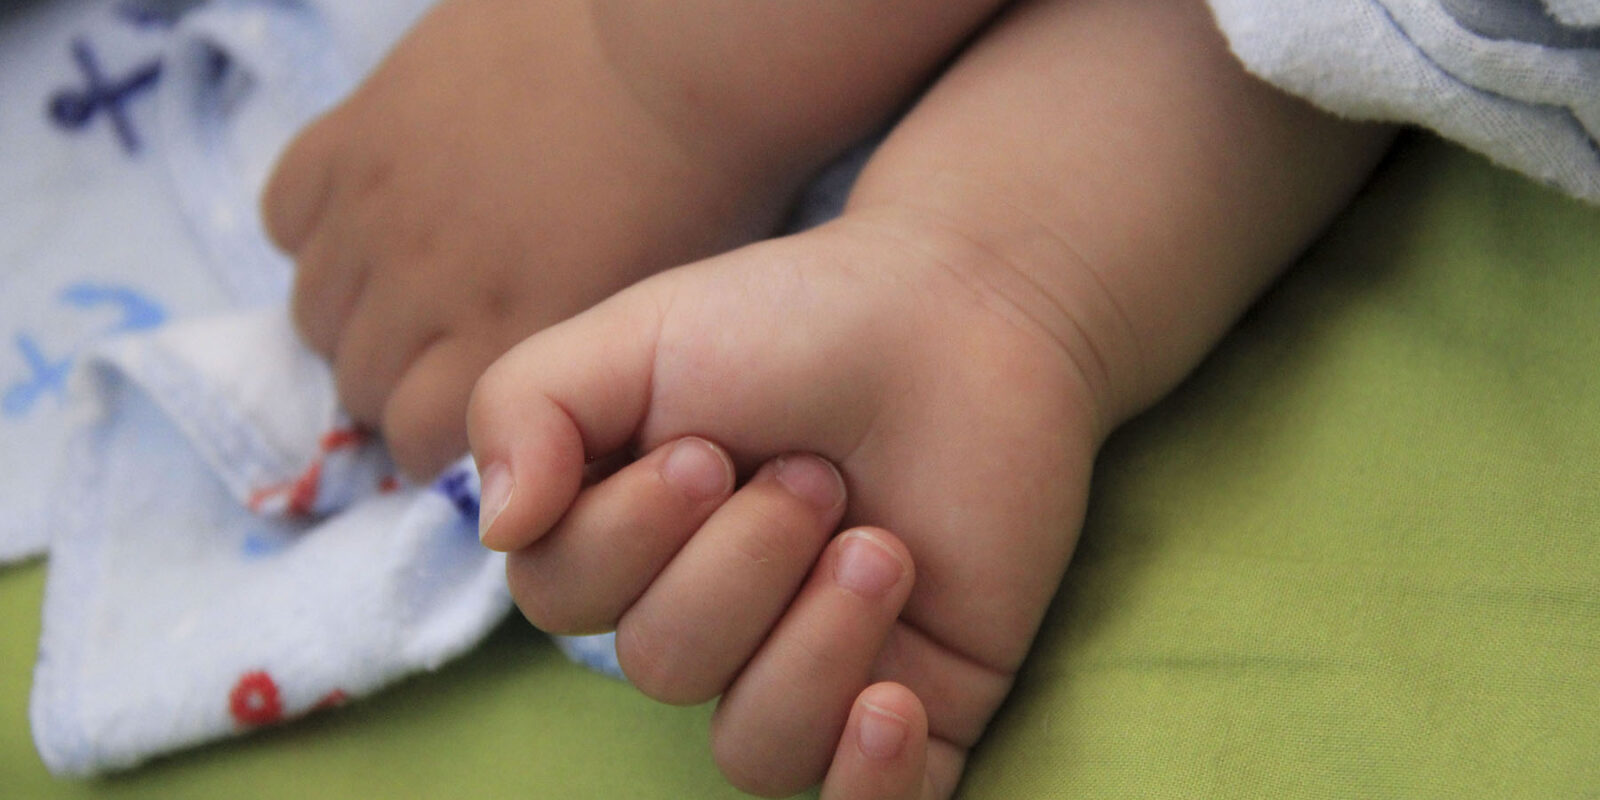 A hand holding a baby